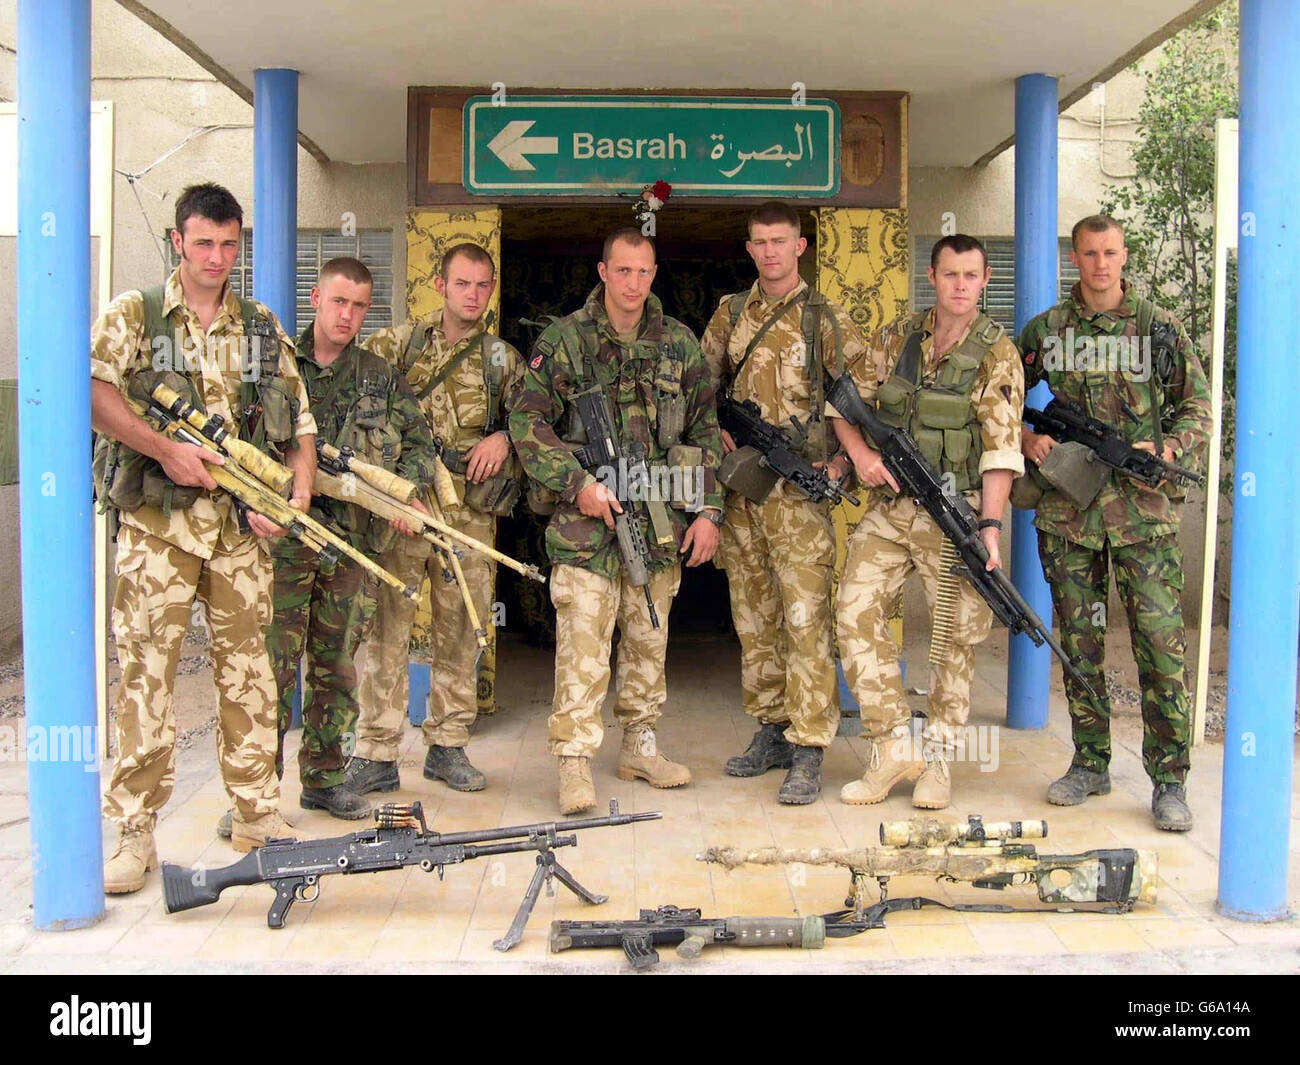 British Army snatch squad in Basra,(l-r) Lance Corporal Richard Watson, 23, of Rawdon, Leeds; Fusilier Nicky Jones, 20, of Amble, Northumberland; Lance Corporal Paul Gerrard, 25, from Rugby; Sergeant Ed Rutherford, 26, of Hexham, Northumberland; *..Lance Corporal Mark Lockhart, 23, of Brunswick, Newcastle; Military Police Corporal Russ Harrison, 31, of Montrose, Scotland; Corporal Harry Harrington, 28, of Leamington Spa, Warwickshire. The squad told how they seized three suspect militia men in a dramatic dawn raid - in just 25 seconds. The team crept up on the building in semi-darkness before Stock Photo